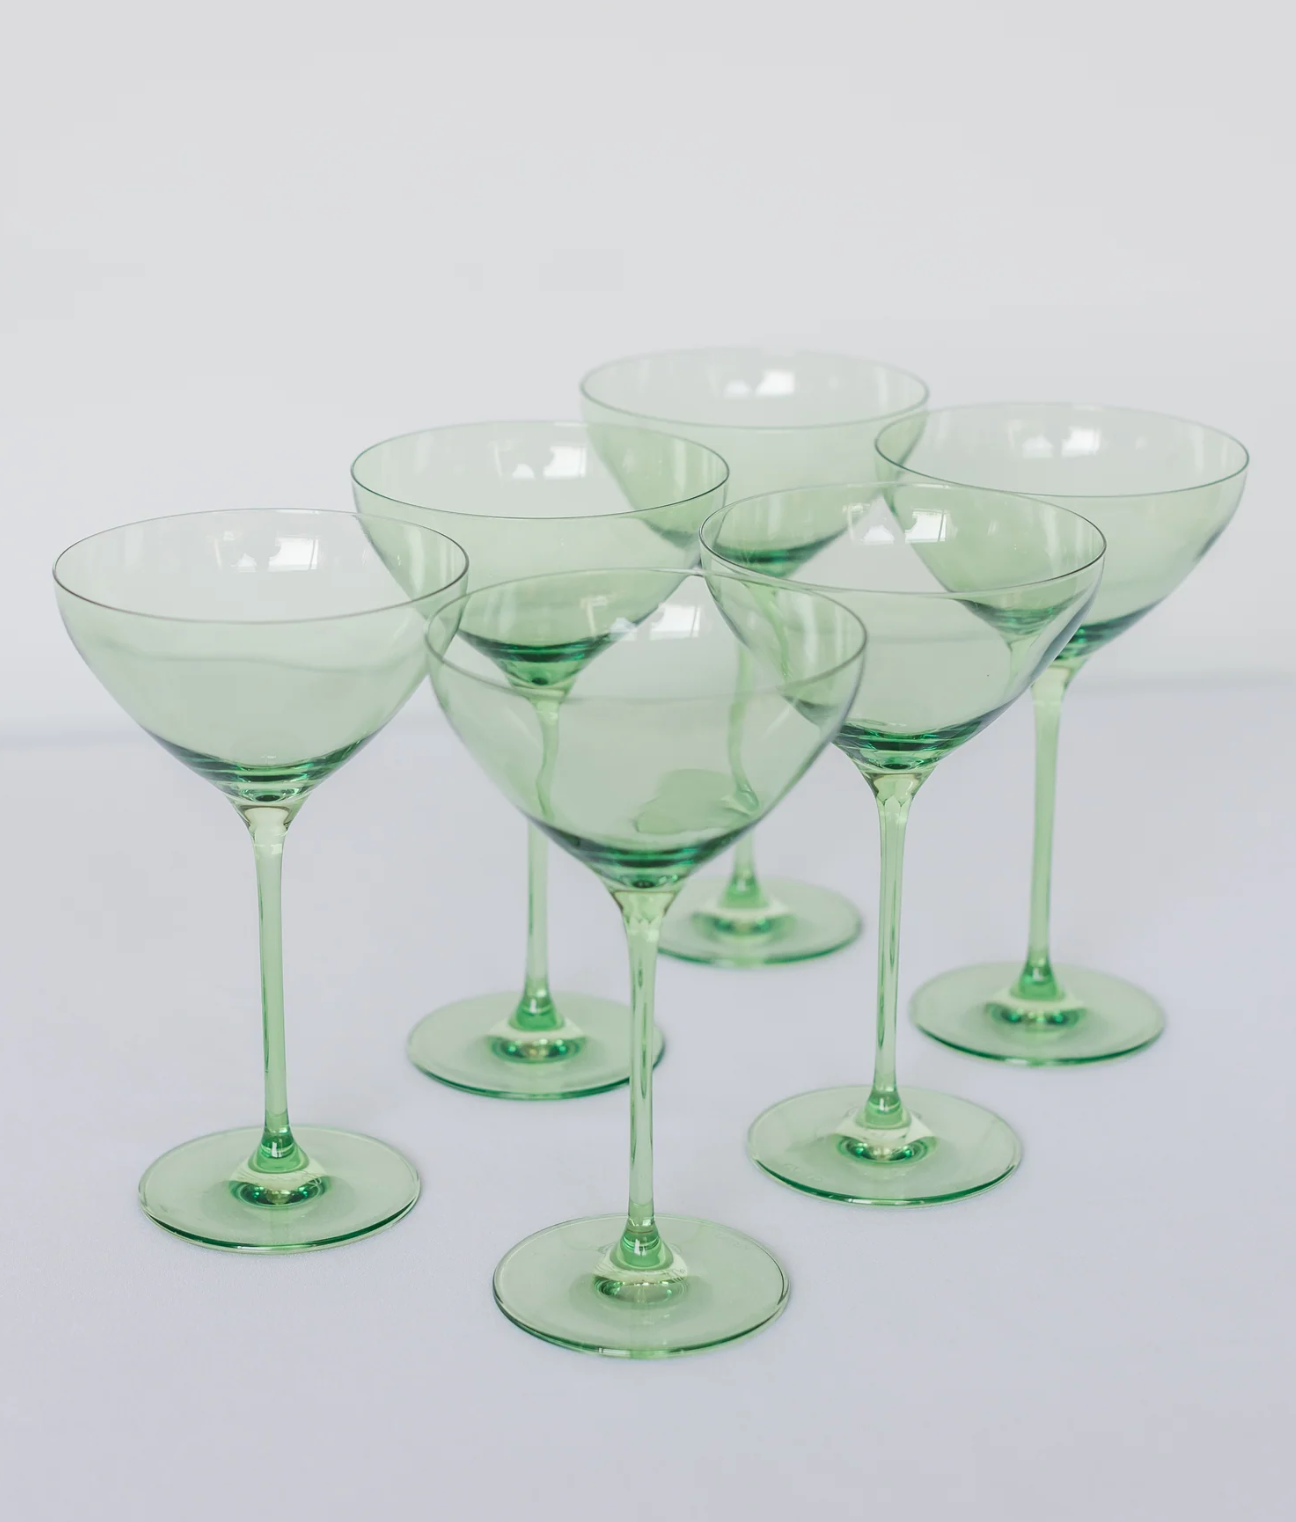 Colored Martini Glass - Mint Green - Estelle Colored Glass (Set of 6)